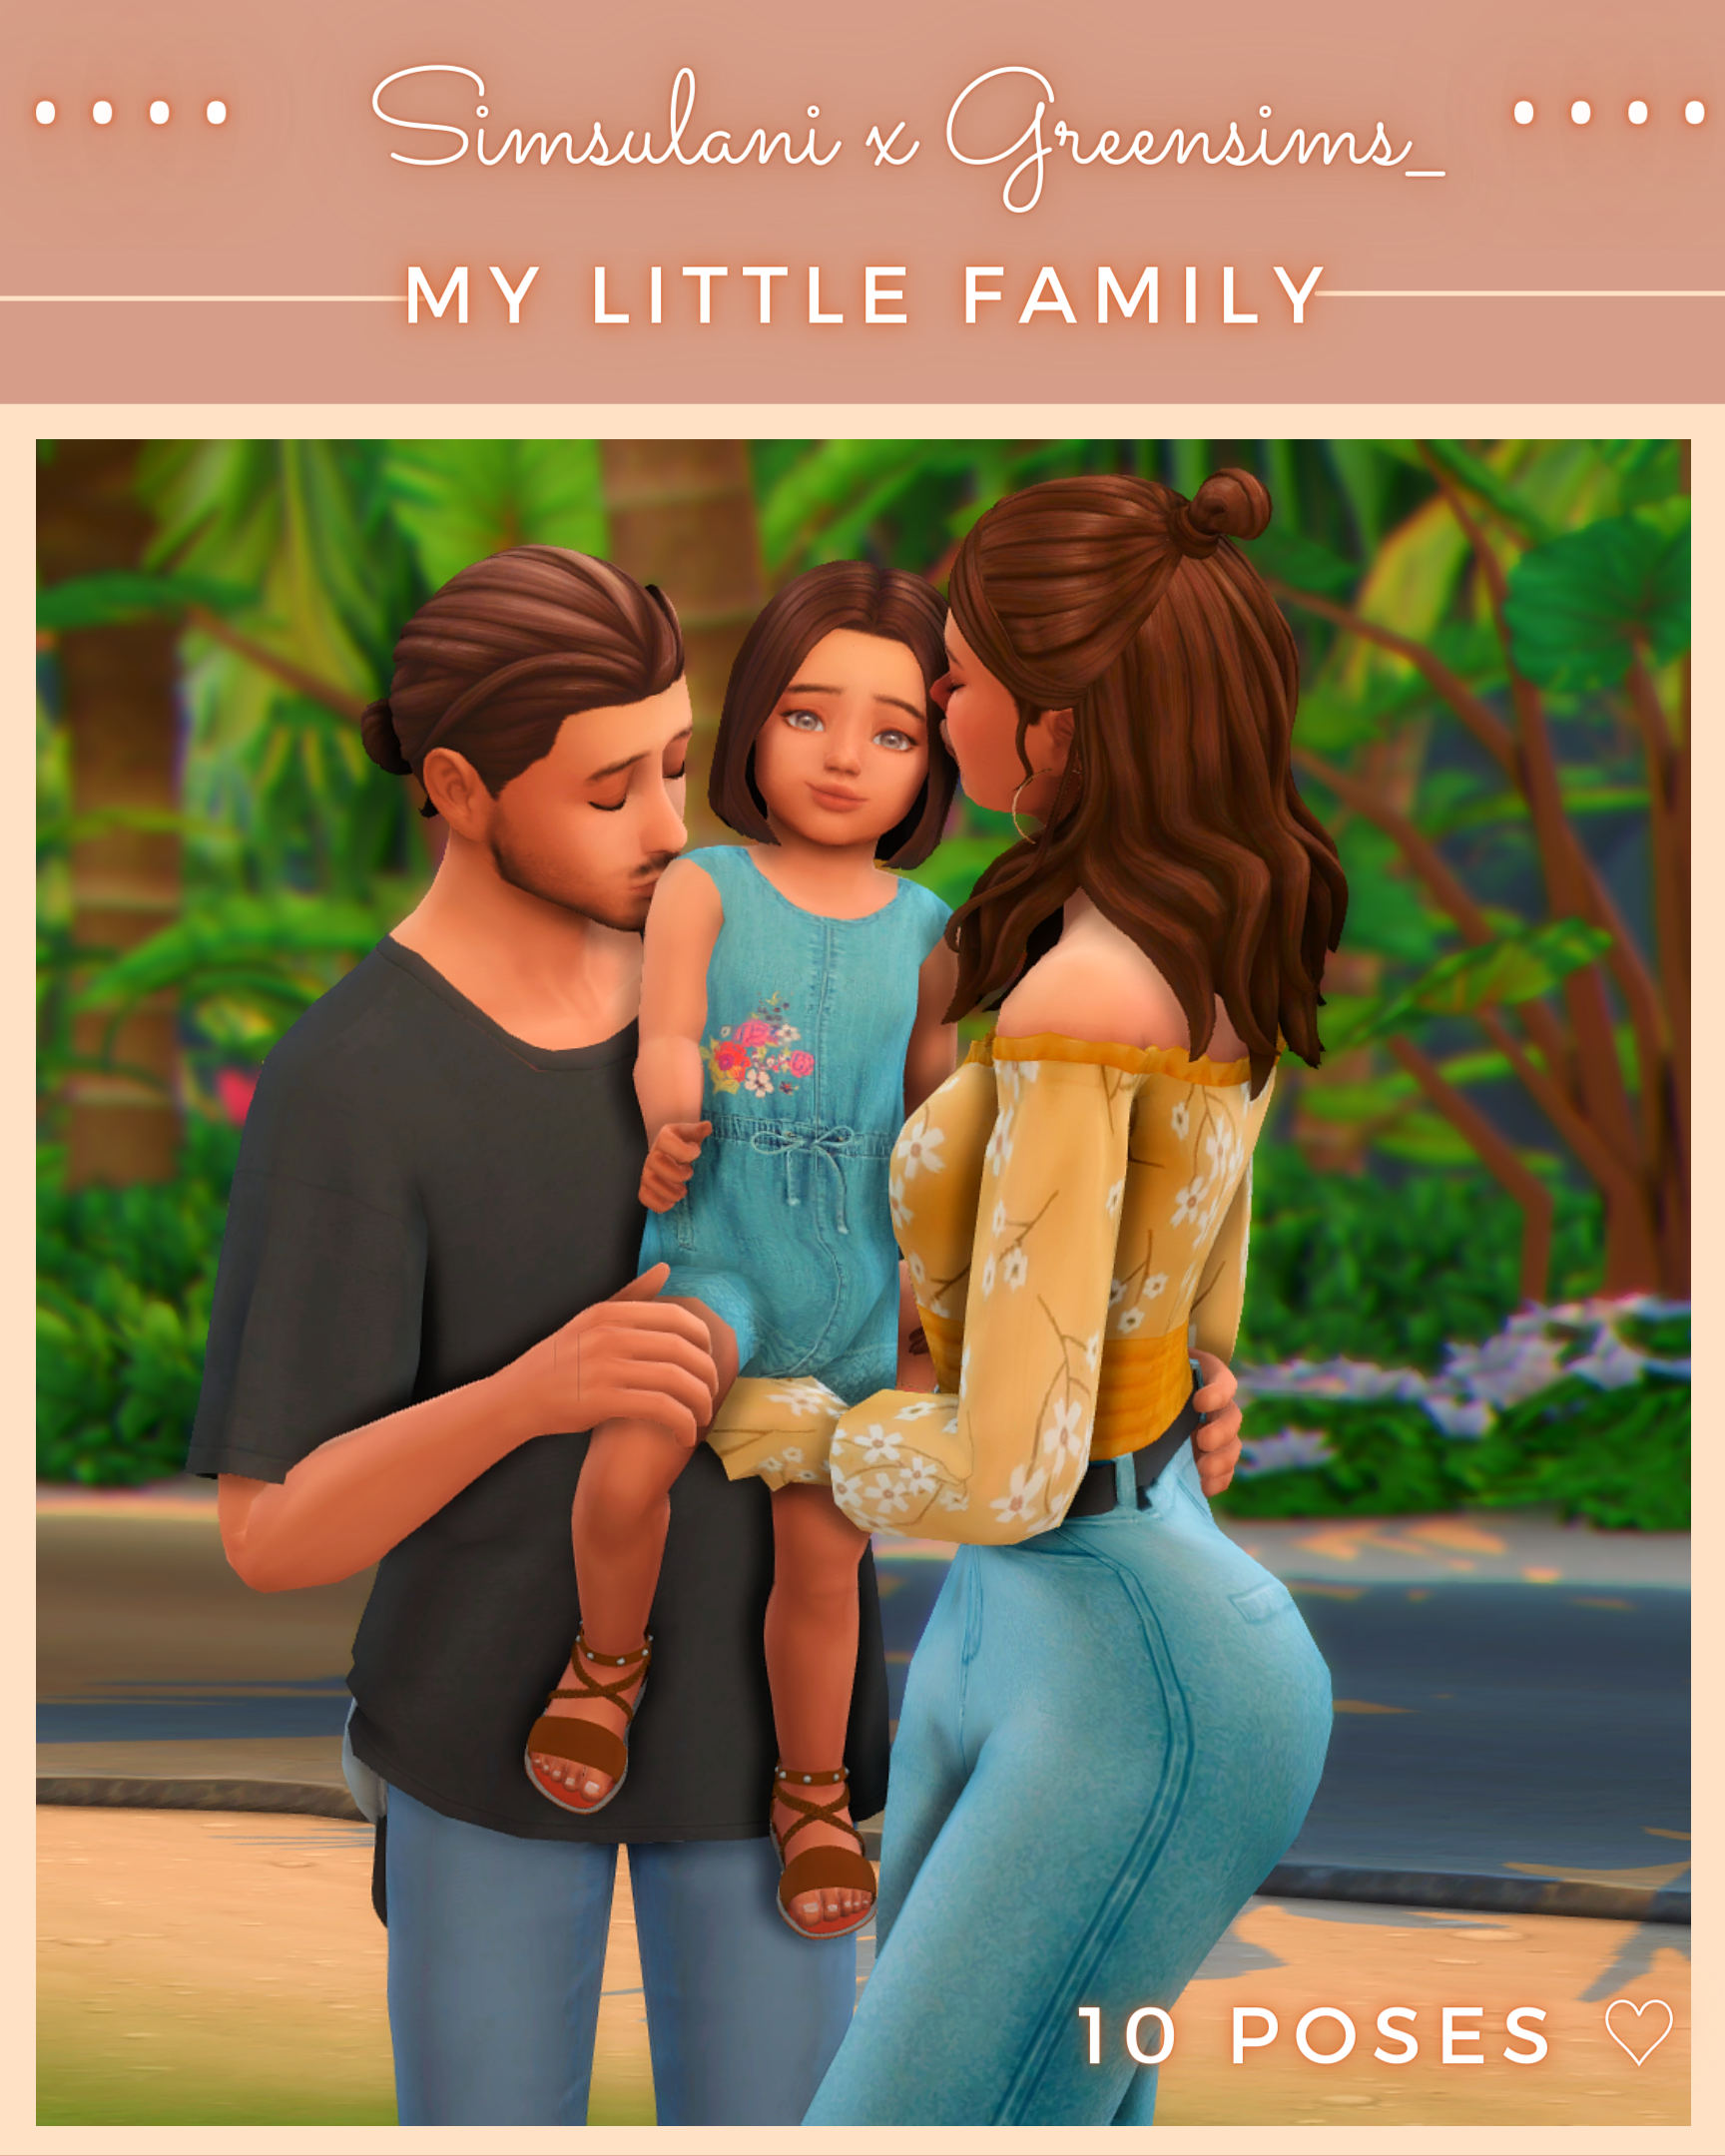 Noobooboo - 7 poses mom, dad and infant - The Sims 4 Download -  SimsFinds.com